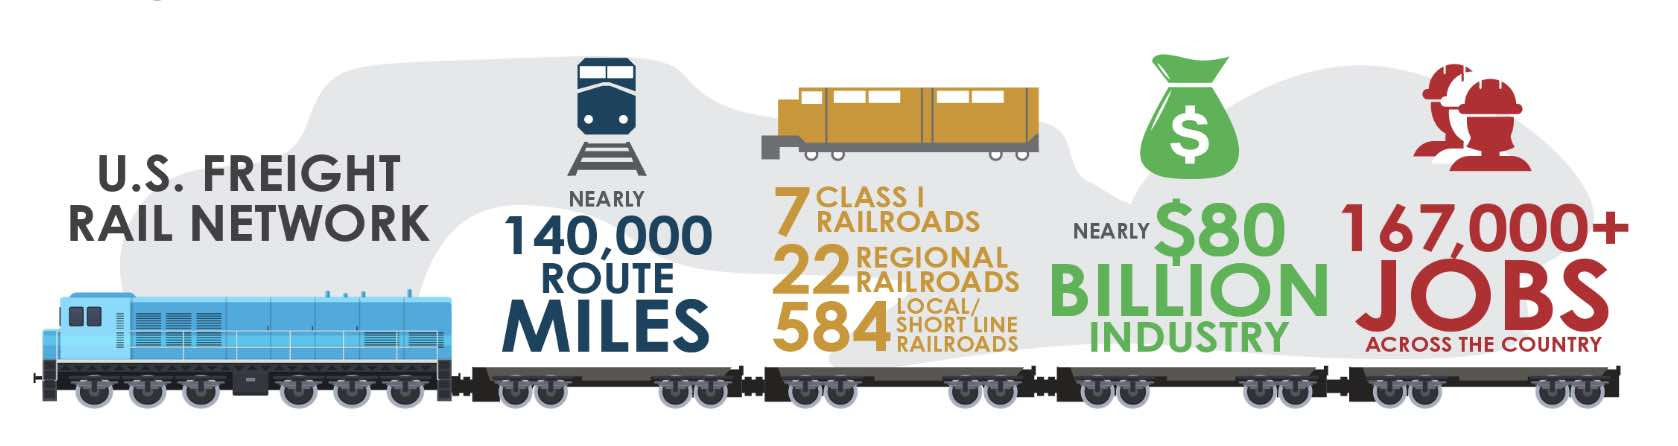 The five-year deal, retroactive to 2020, includes the 24% raises and $5,000 in bonuses that a Presidential Emergency Board recommended this summer. But railroads also agreed to ease their strict attendance policies to address some of the unions’ concerns about working conditions.